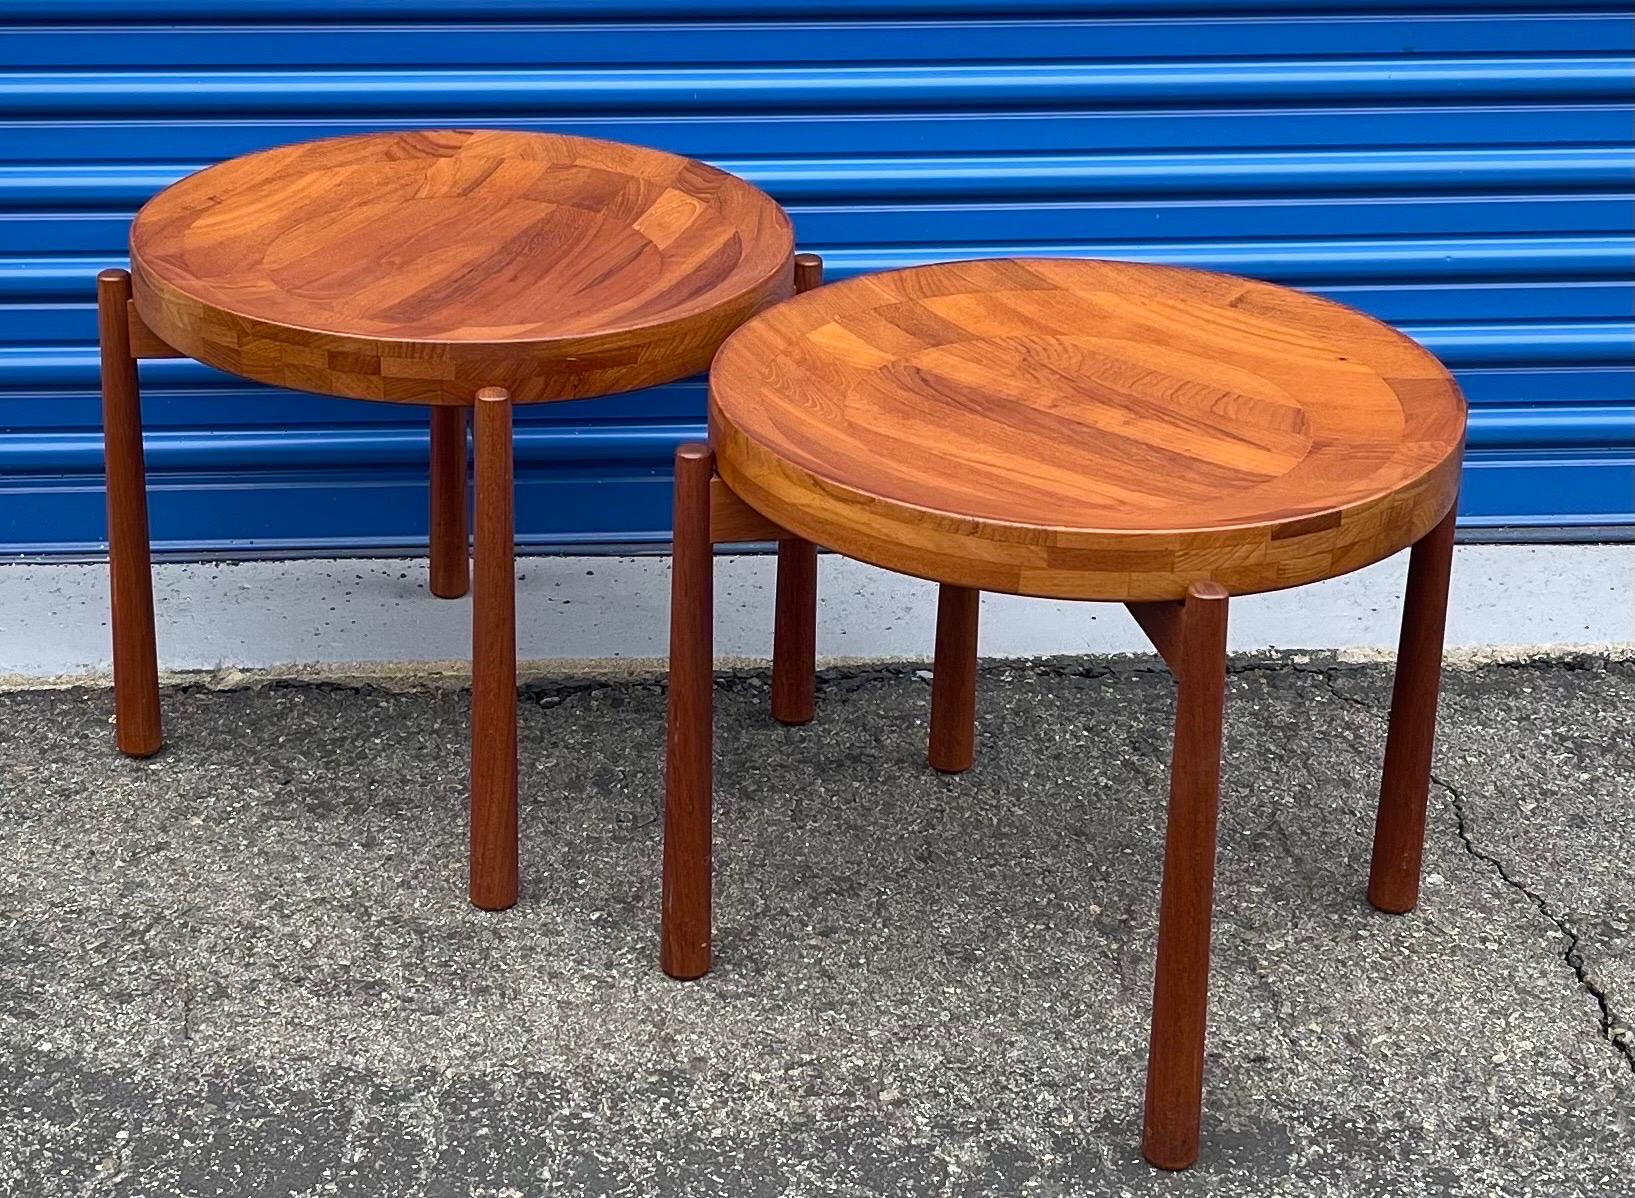 Pair of Teak Tray Side Tables Attributed to Jens Quistgaard for DUX of Sweden For Sale 6